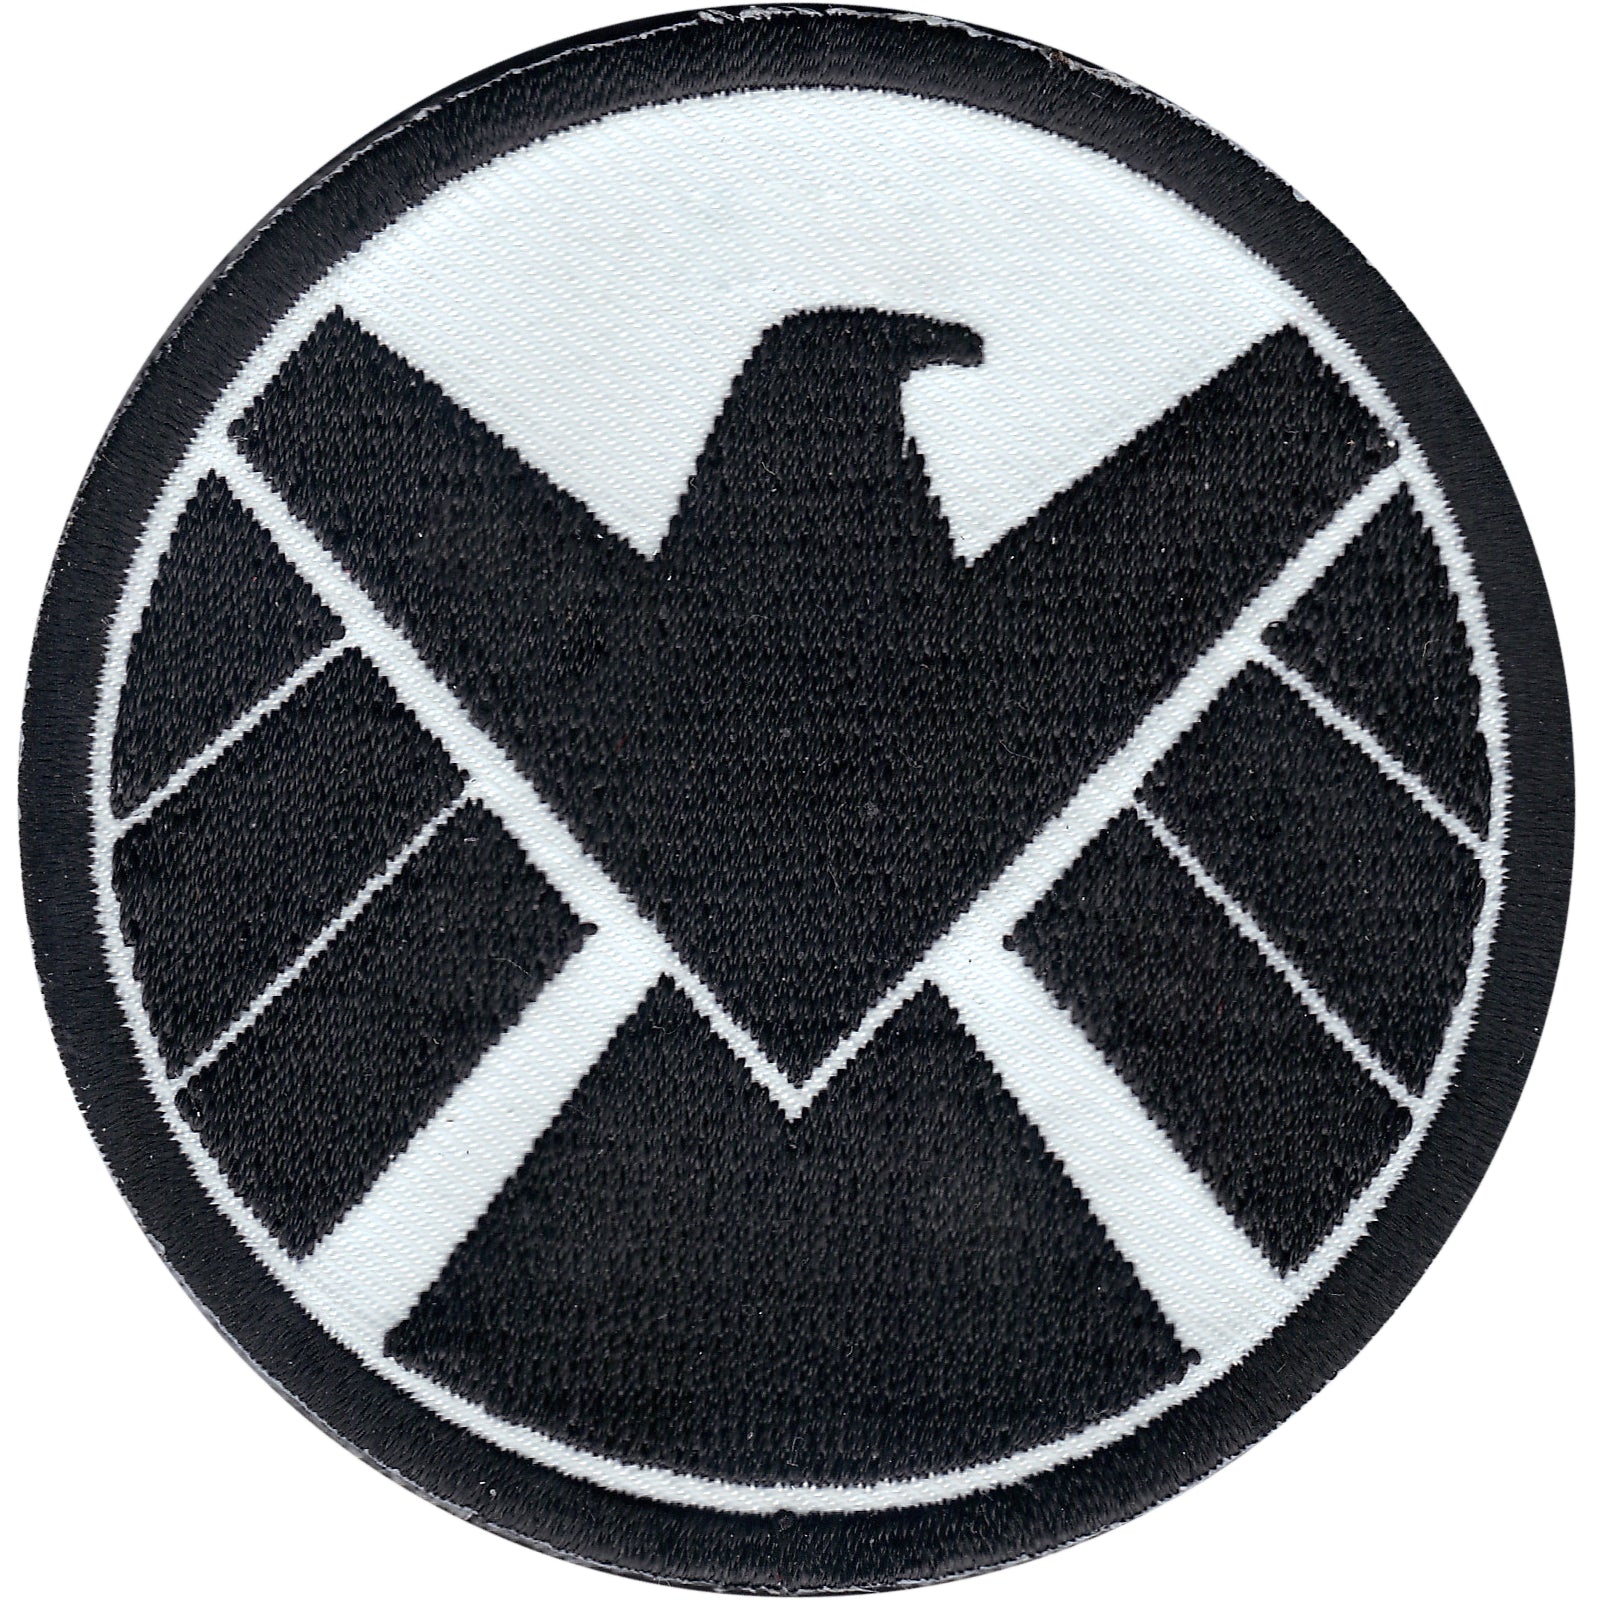 Marvel Comics Avengers Agents Of The Shield Crest Iron on Patch 